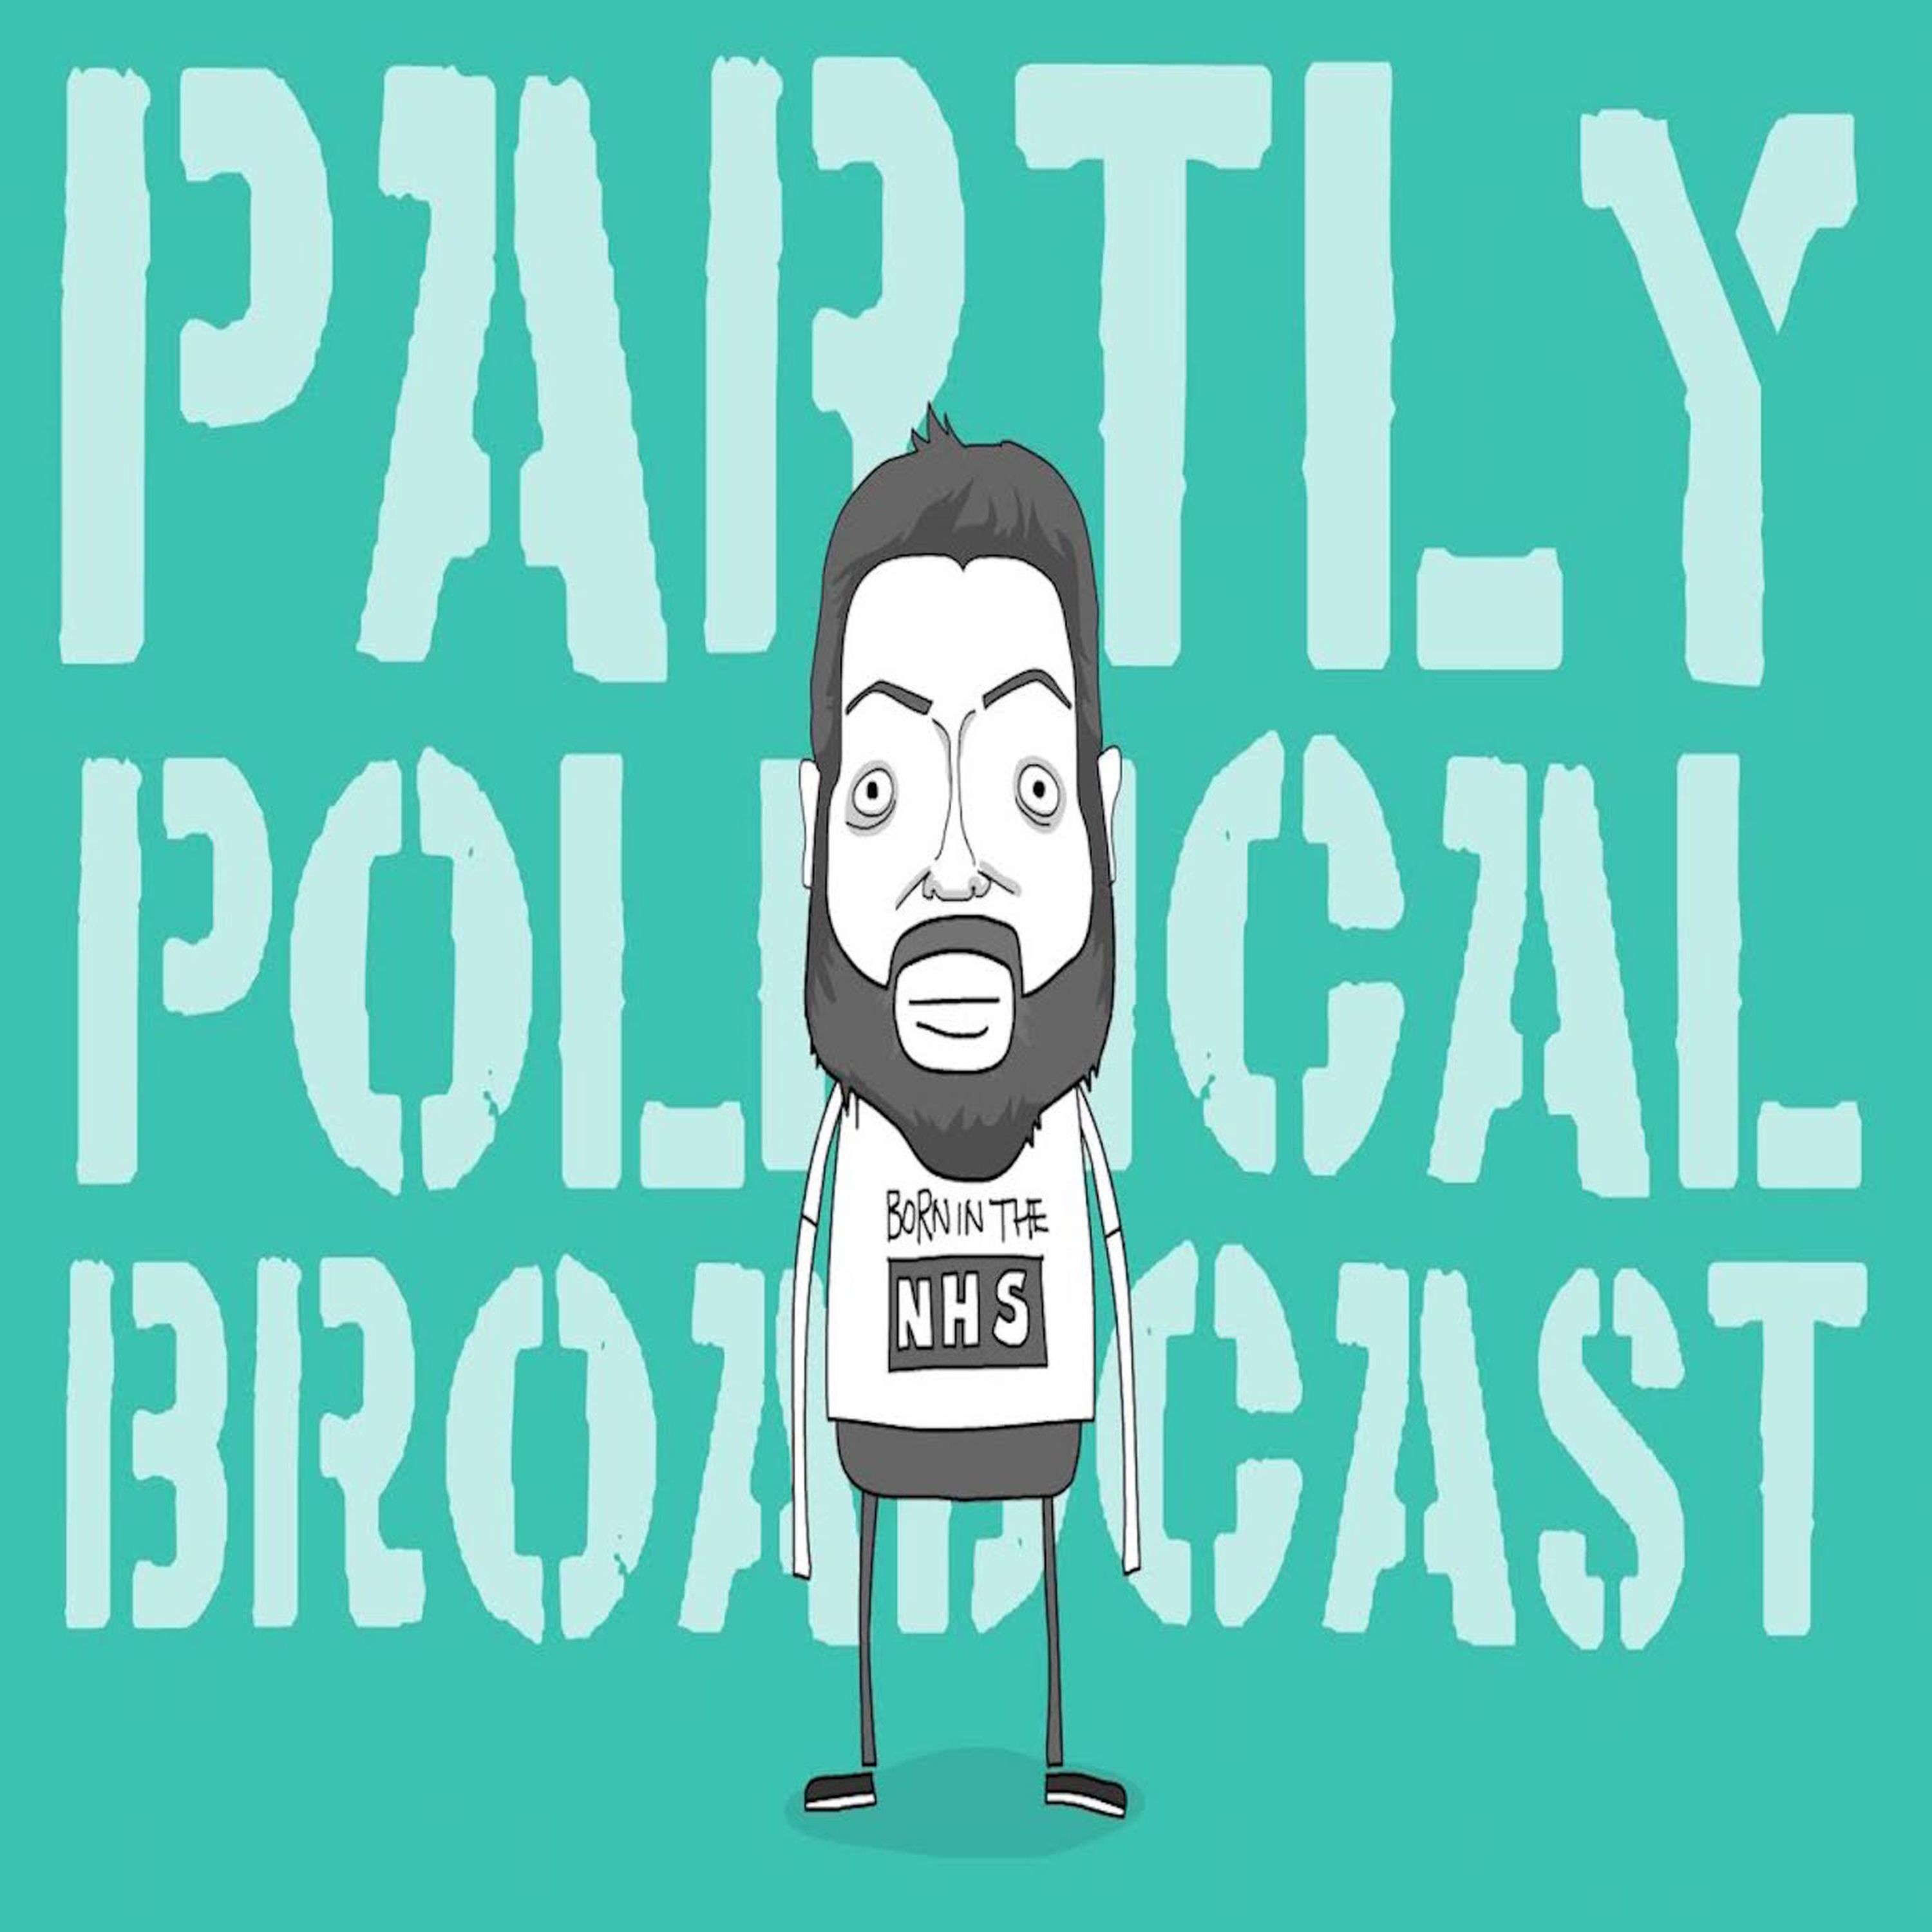 Partly Political Broadcast – Episode 45, 31st January 2017